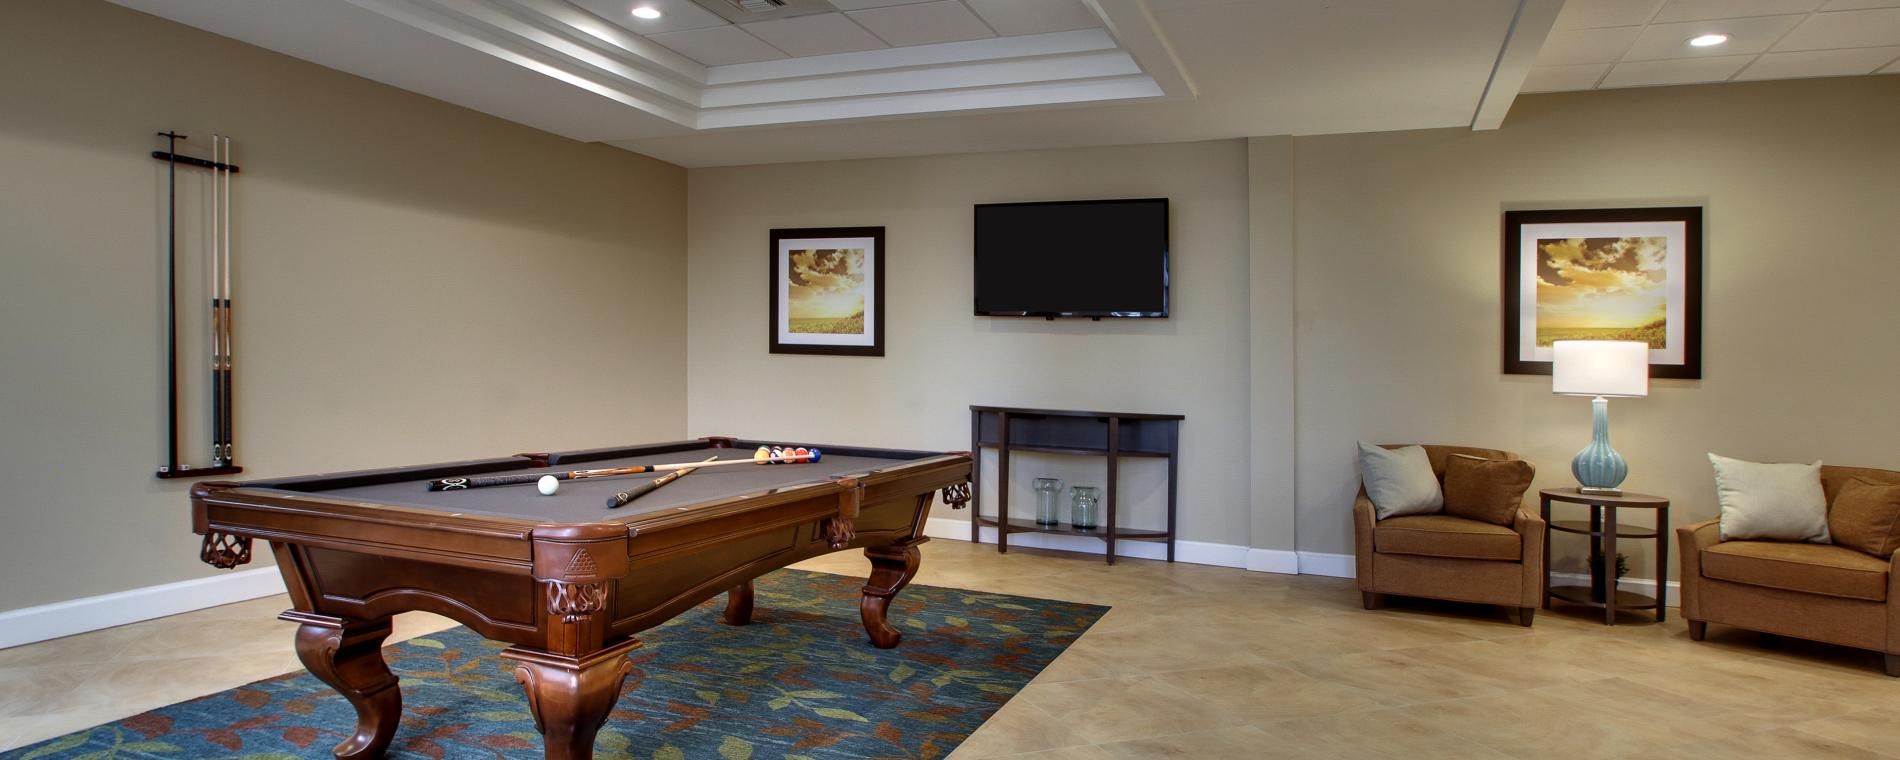 Candlewood Suites Wichita East Game room